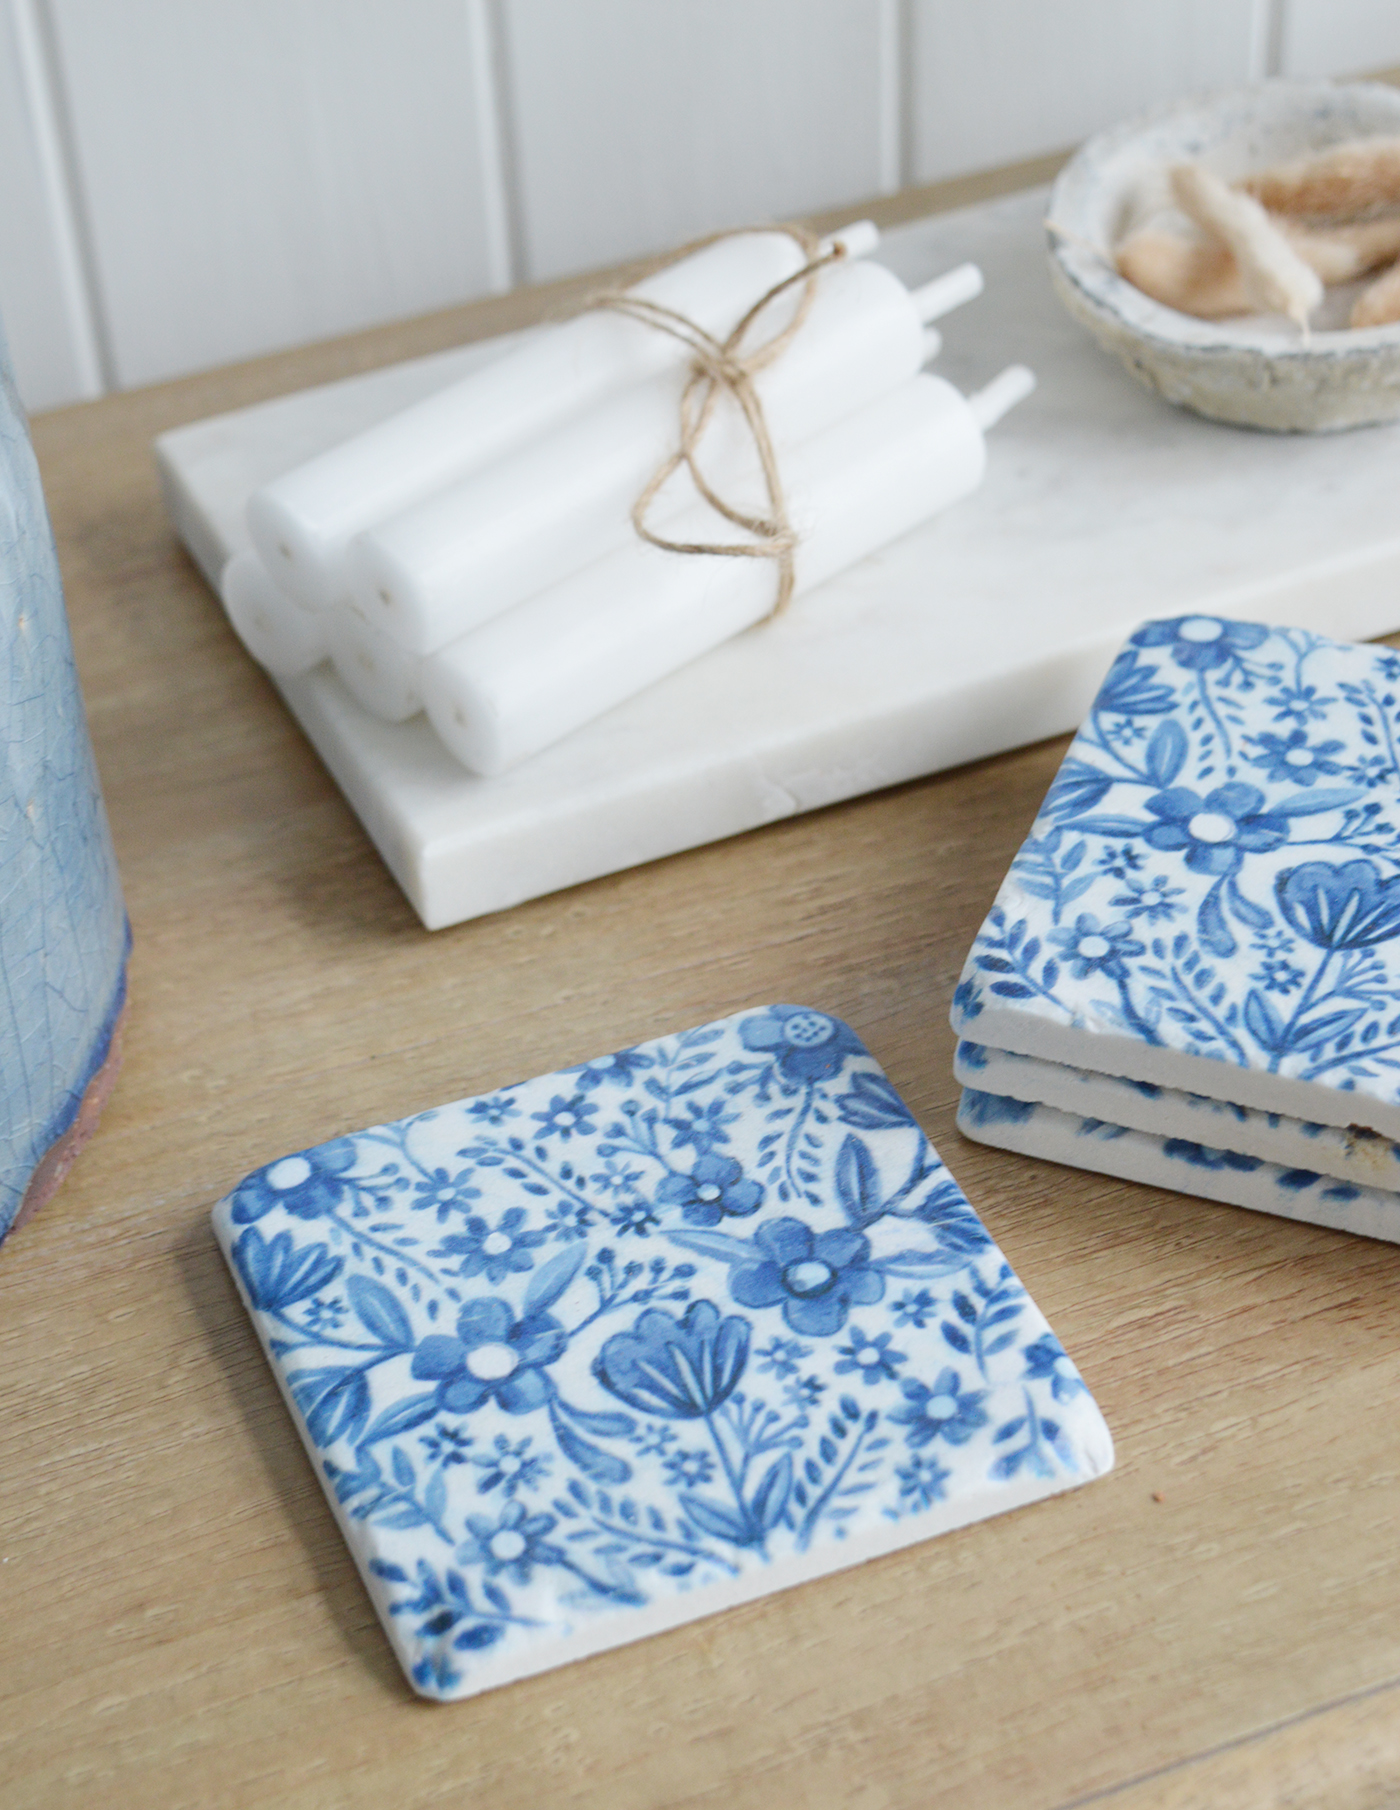 Blue and white floral coasters, perfect for both new England coastal and country interiors